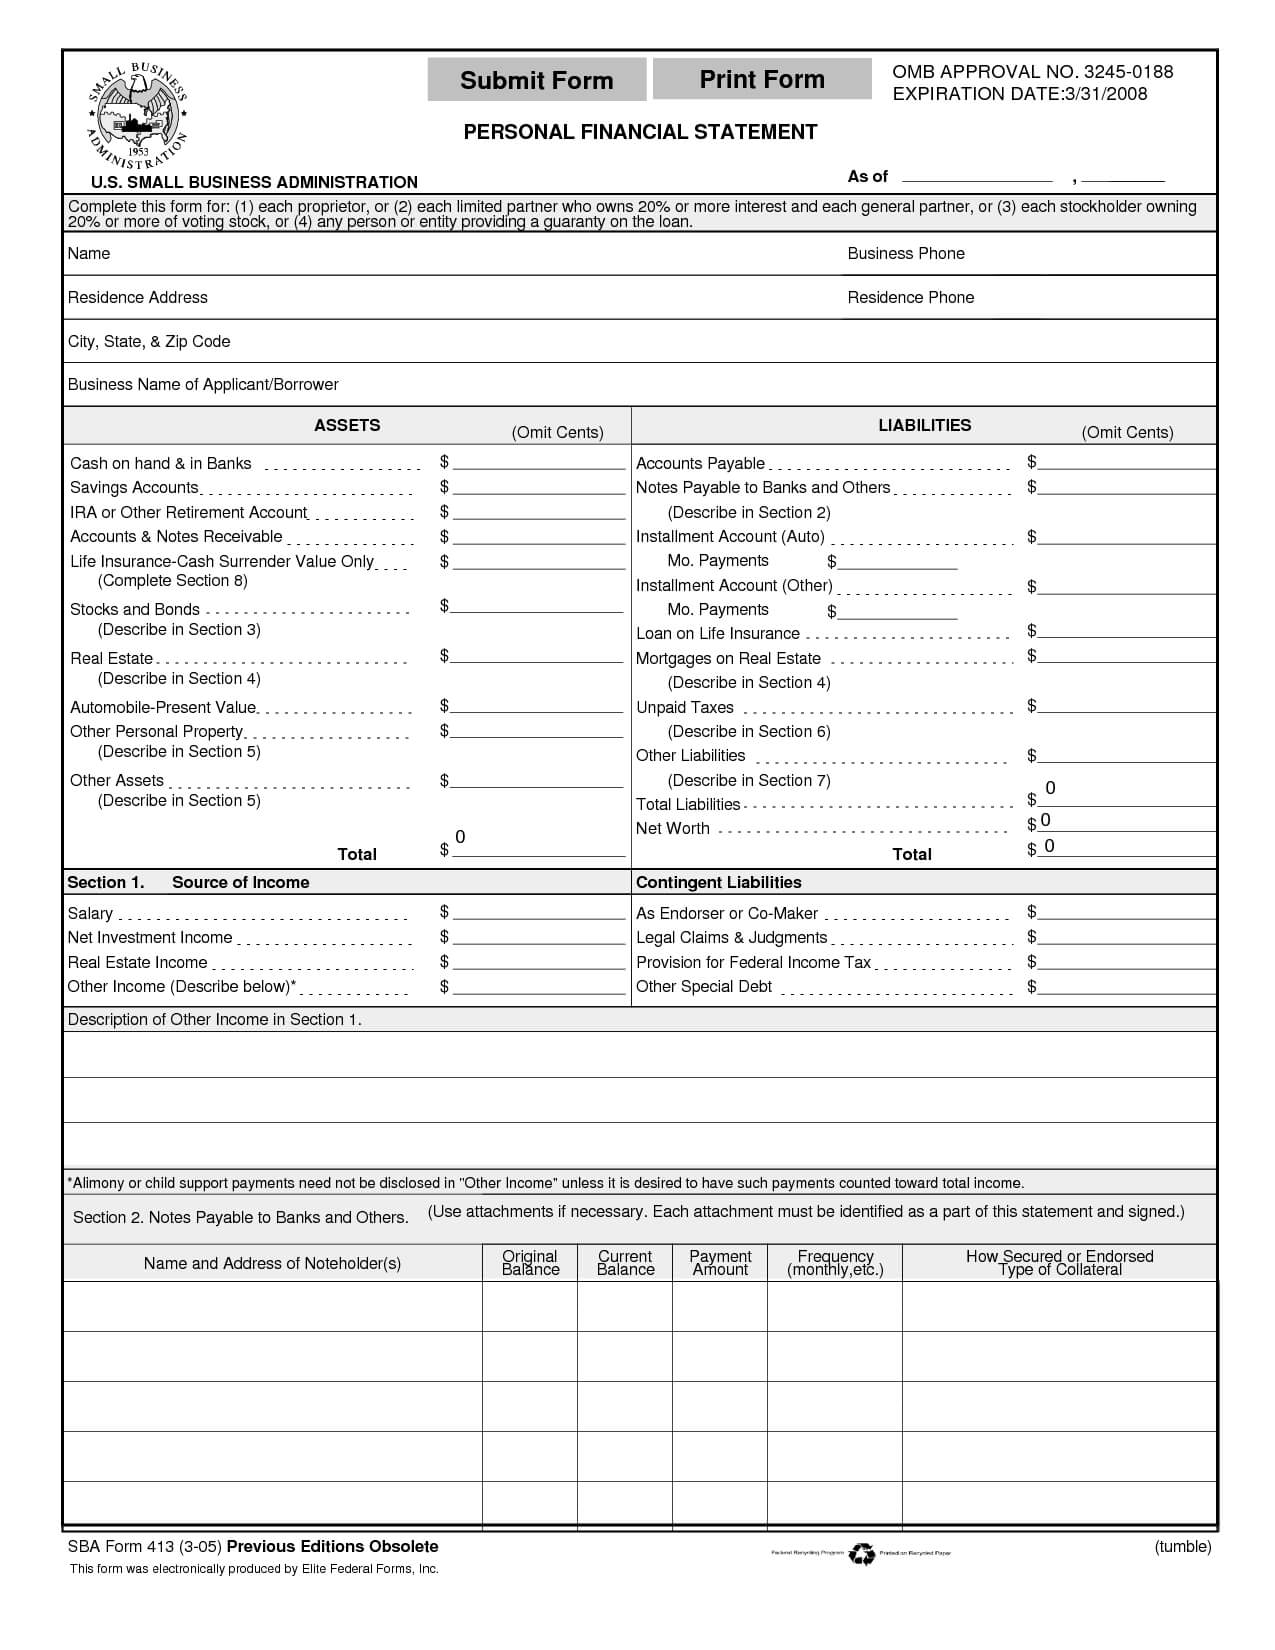 Print Personal Financial Statement Form | Print Form Regarding Blank Personal Financial Statement Template